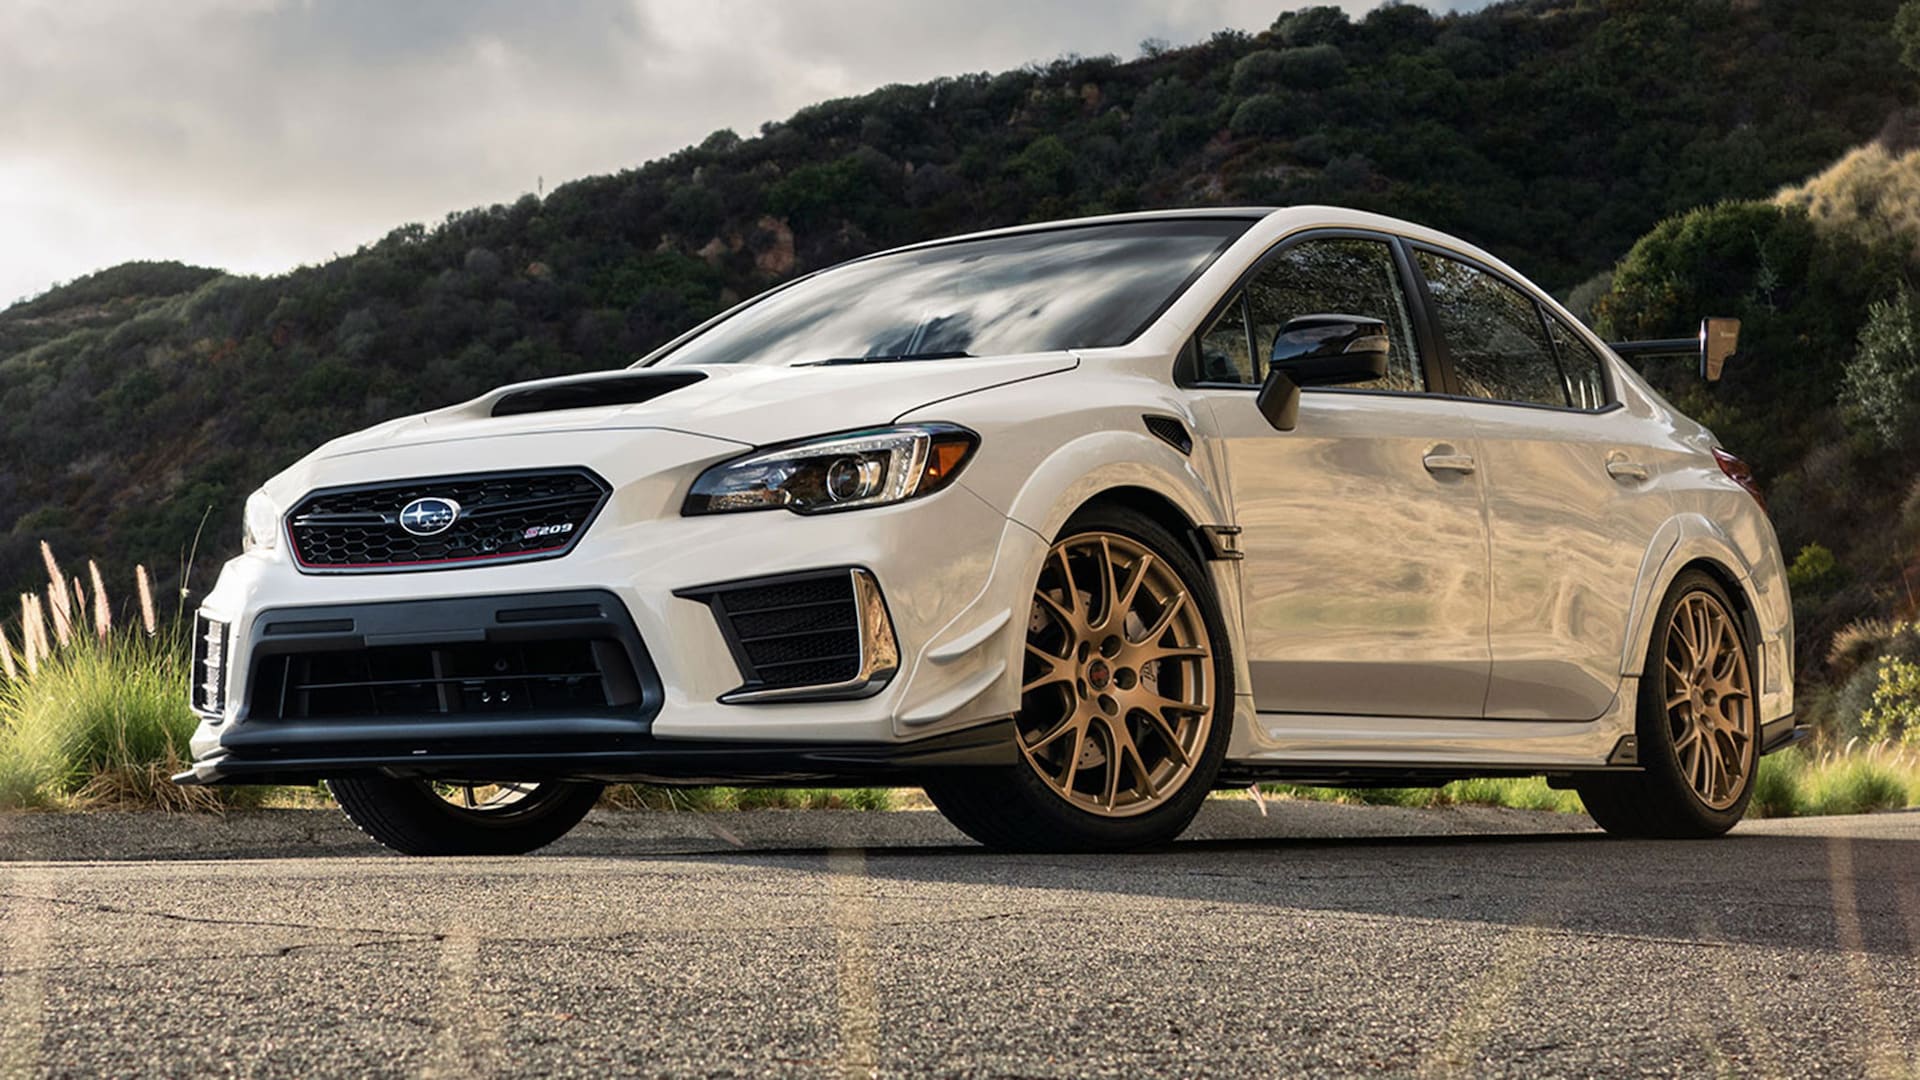 2019 Subaru WRX STI S209 First Test: What Makes You So Special?